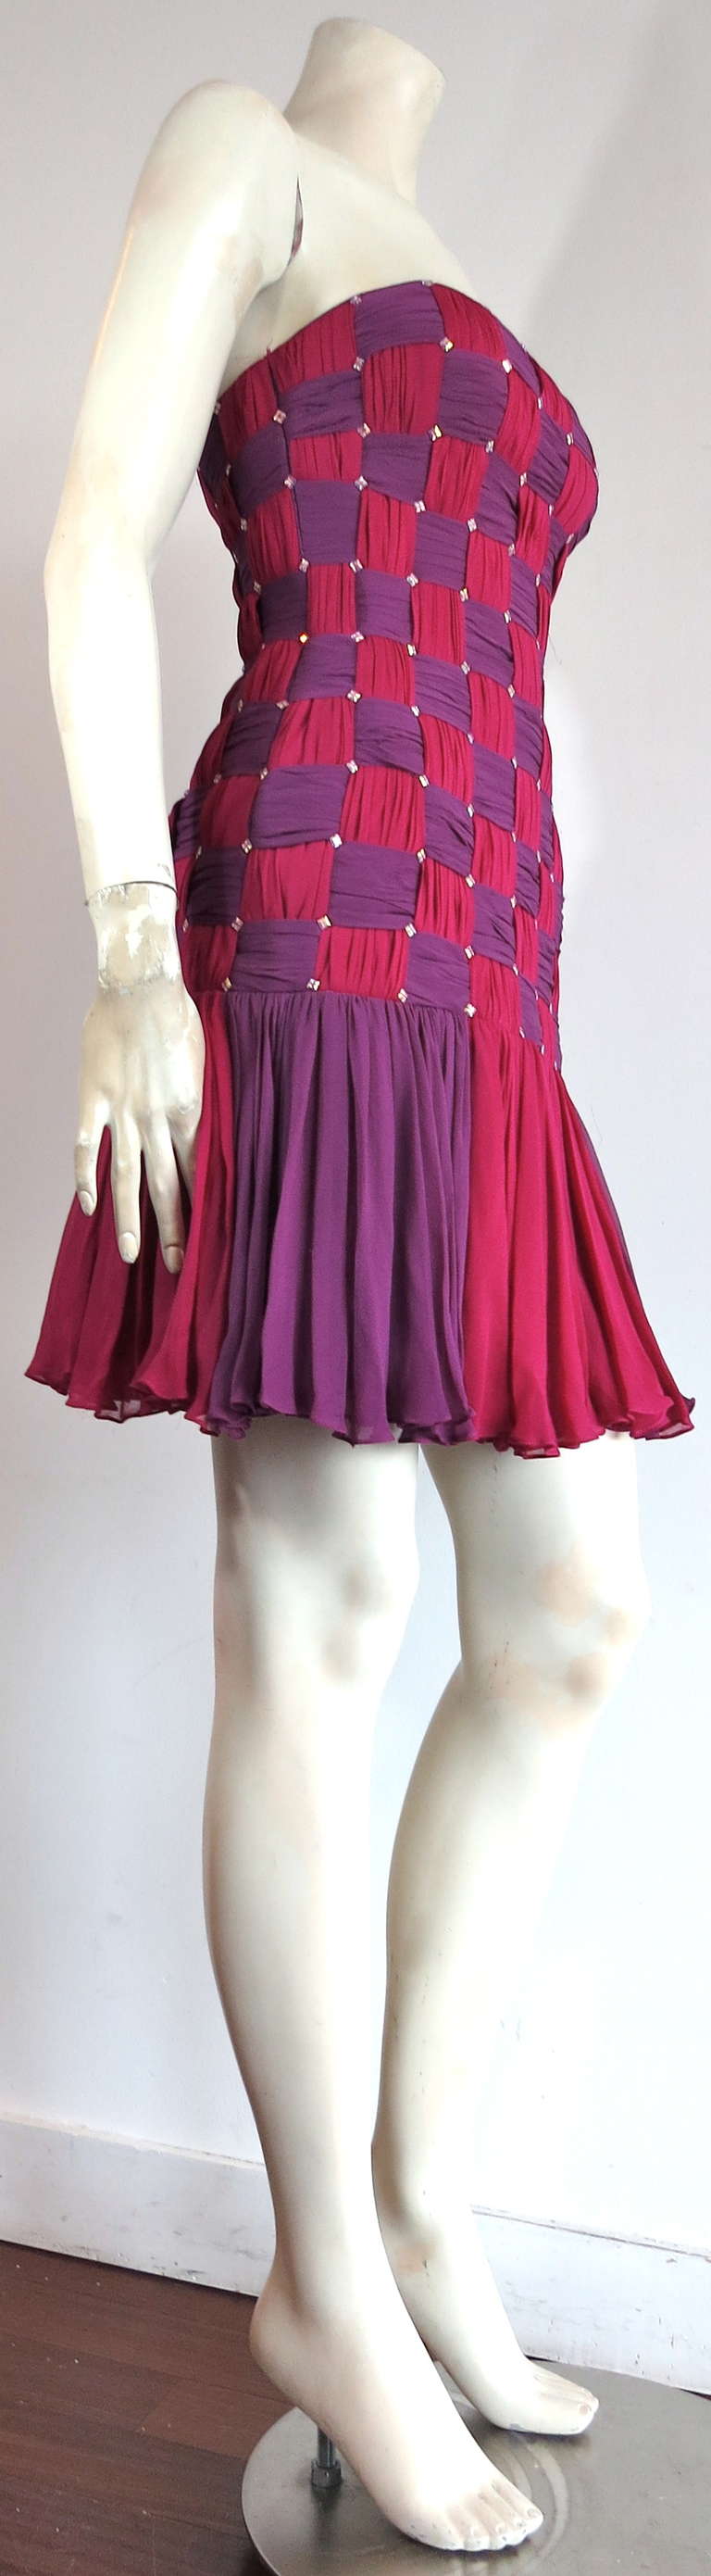 Excellent condition MICHAEL CASEY silk basket weave cocktail dress.

This amazing dress was designed by Michael Casey during the 1980's in the USA.

100% Silk chiffon, basket woven torso with flared hem.

Intersections of the basket weave